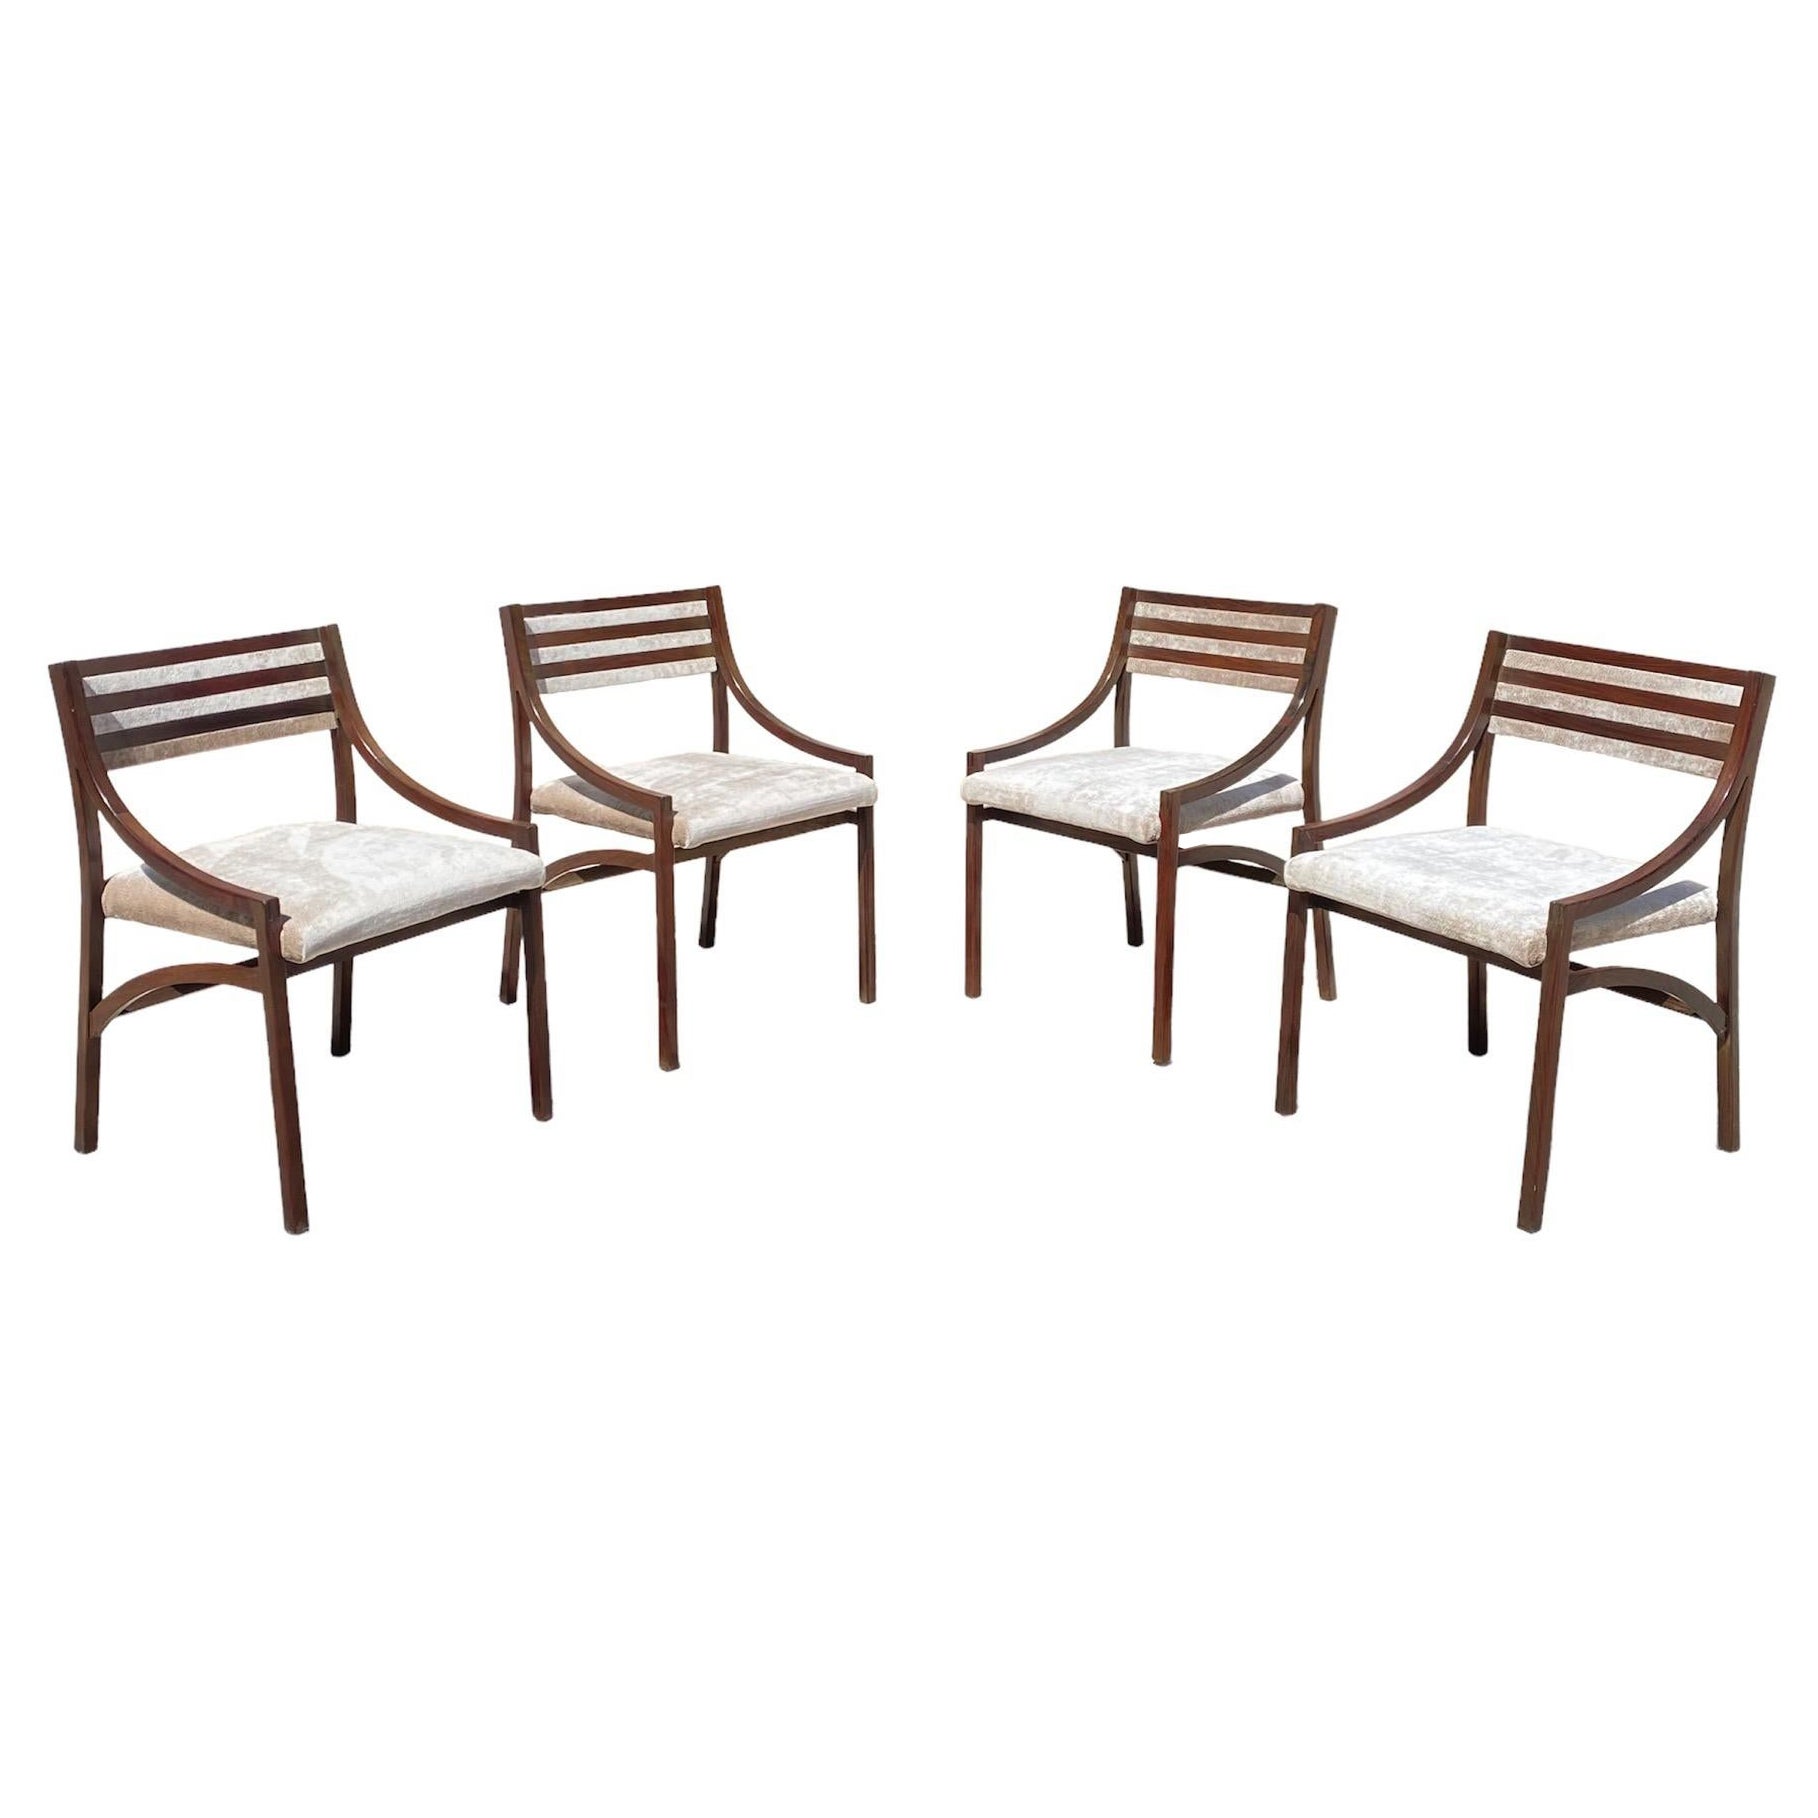 Set of 4 Chairs "110" designed by Ico Parisi for Cassina For Sale